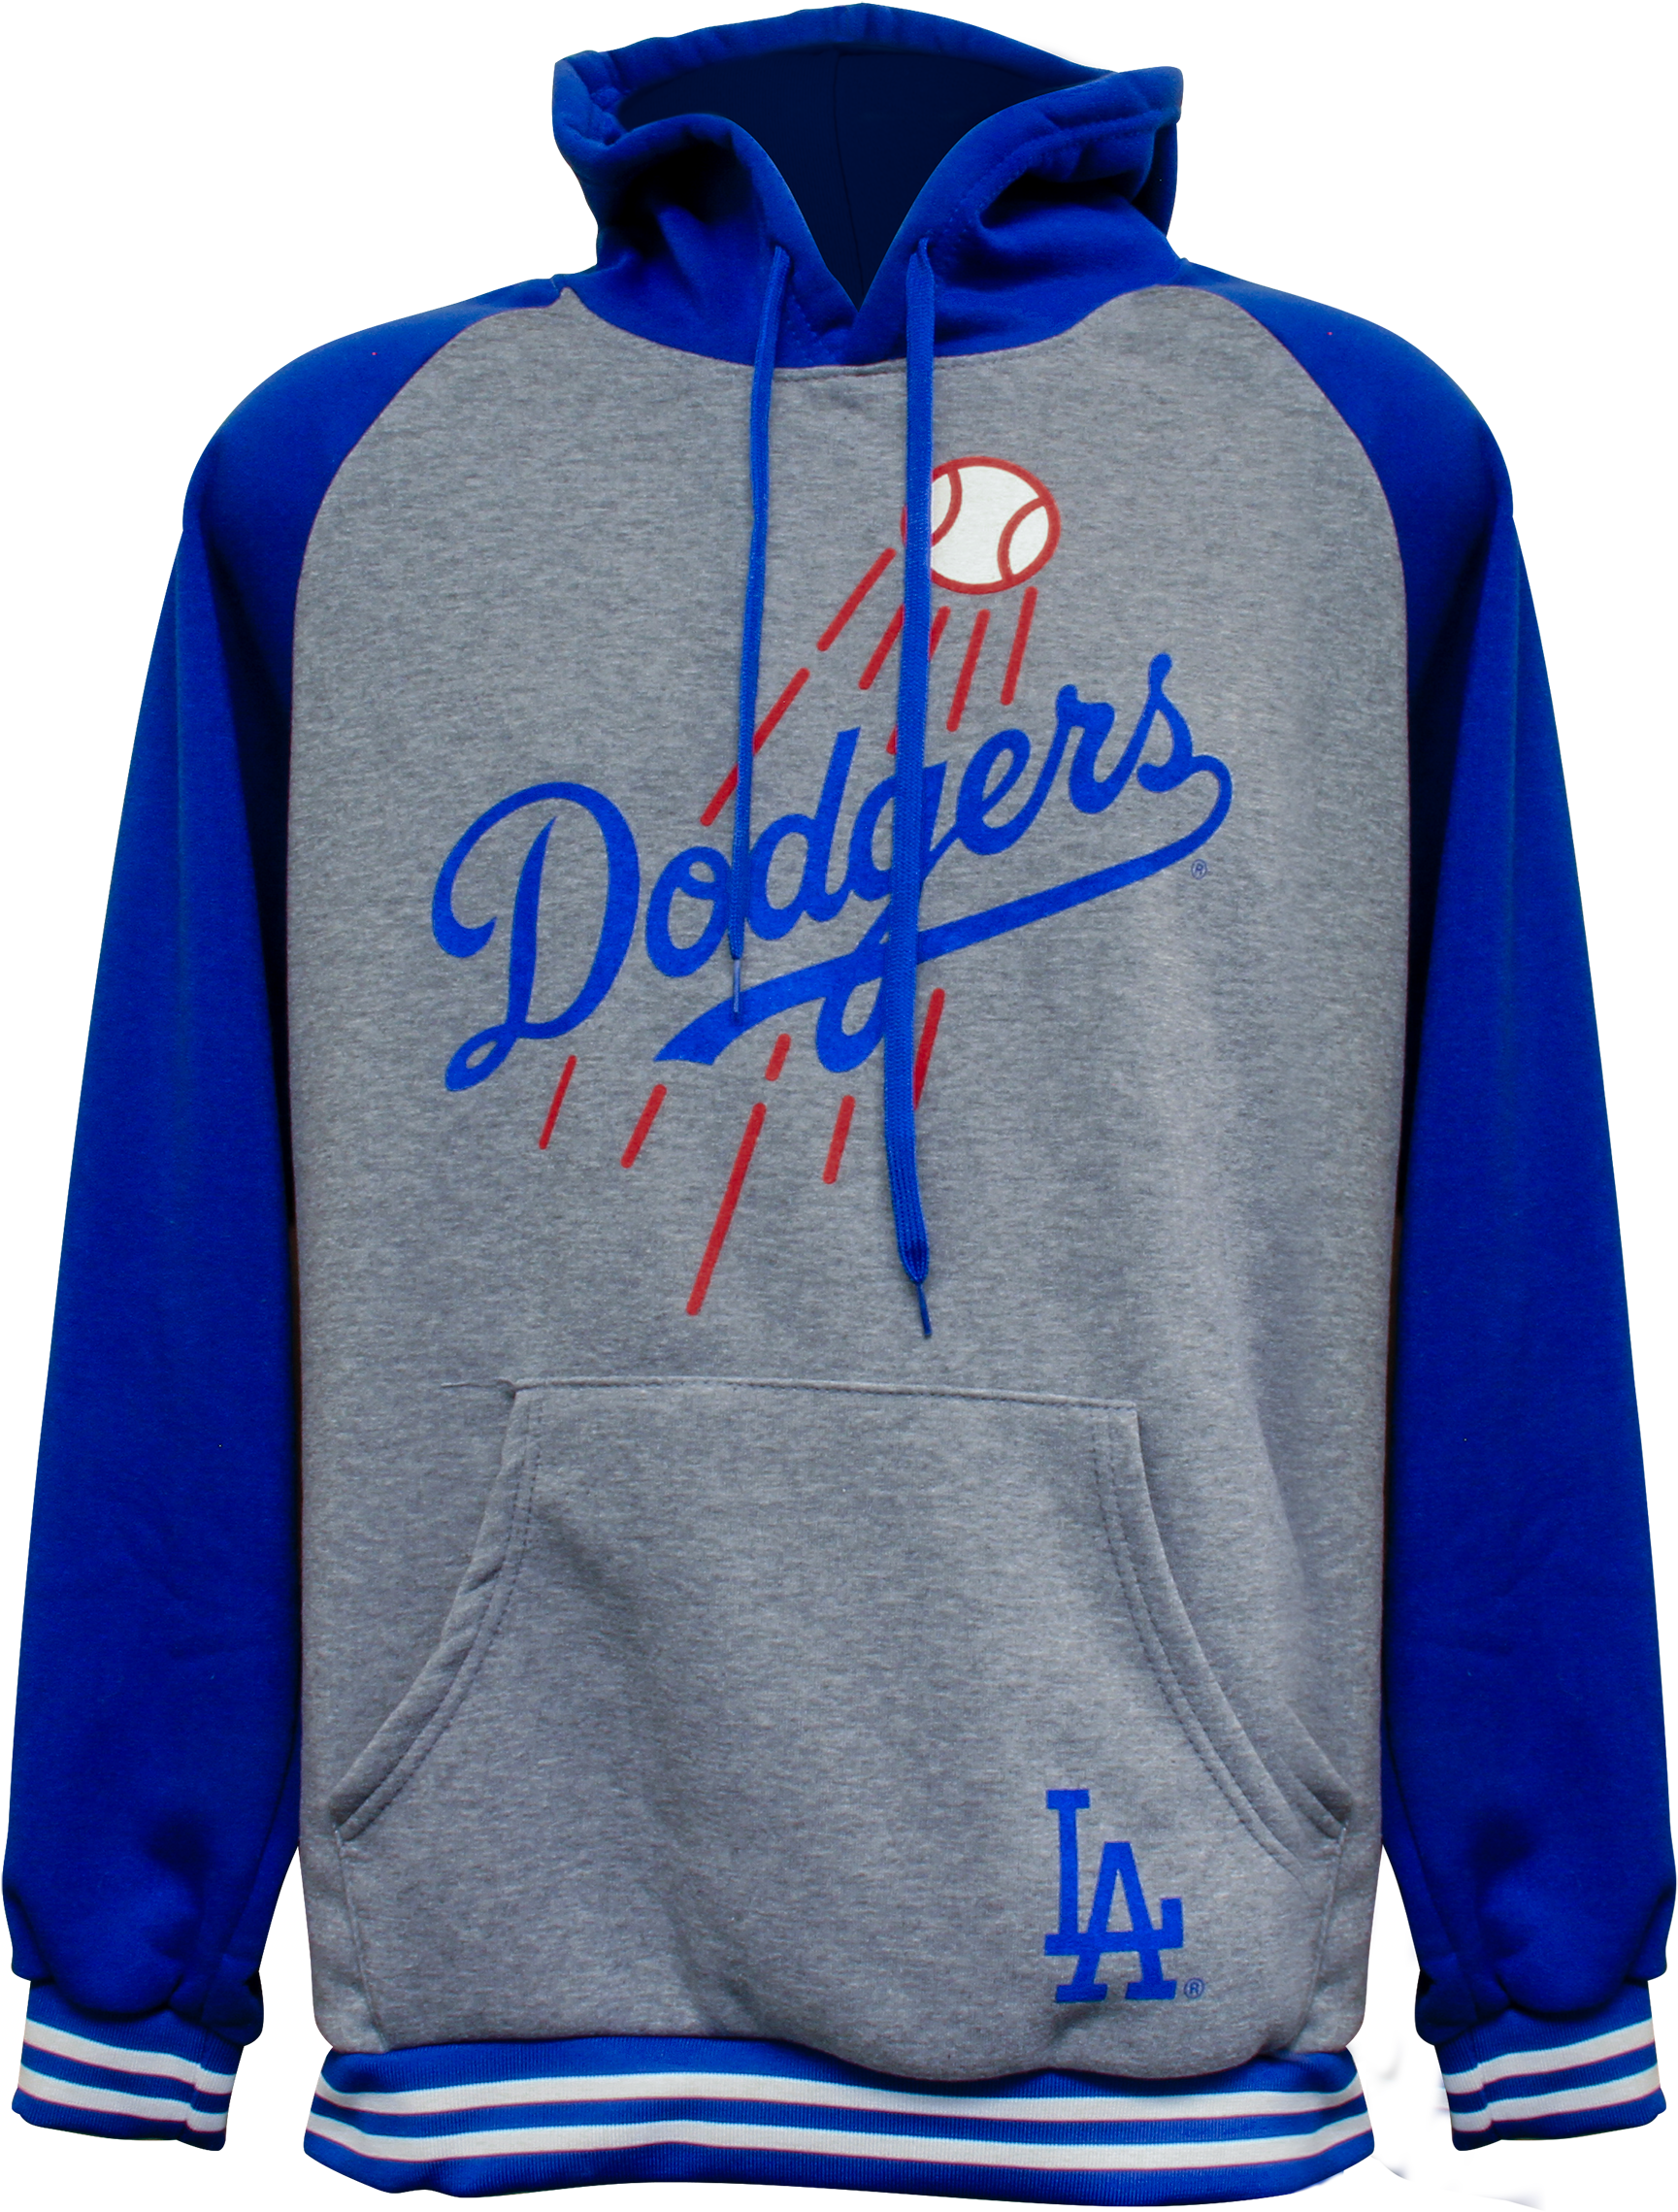 The Los Angeles Dodgers Will Give Away A Hooded Sweatshirt - The Los Angeles Dodgers Will Give Away A Hooded Sweatshirt (2608x2608)